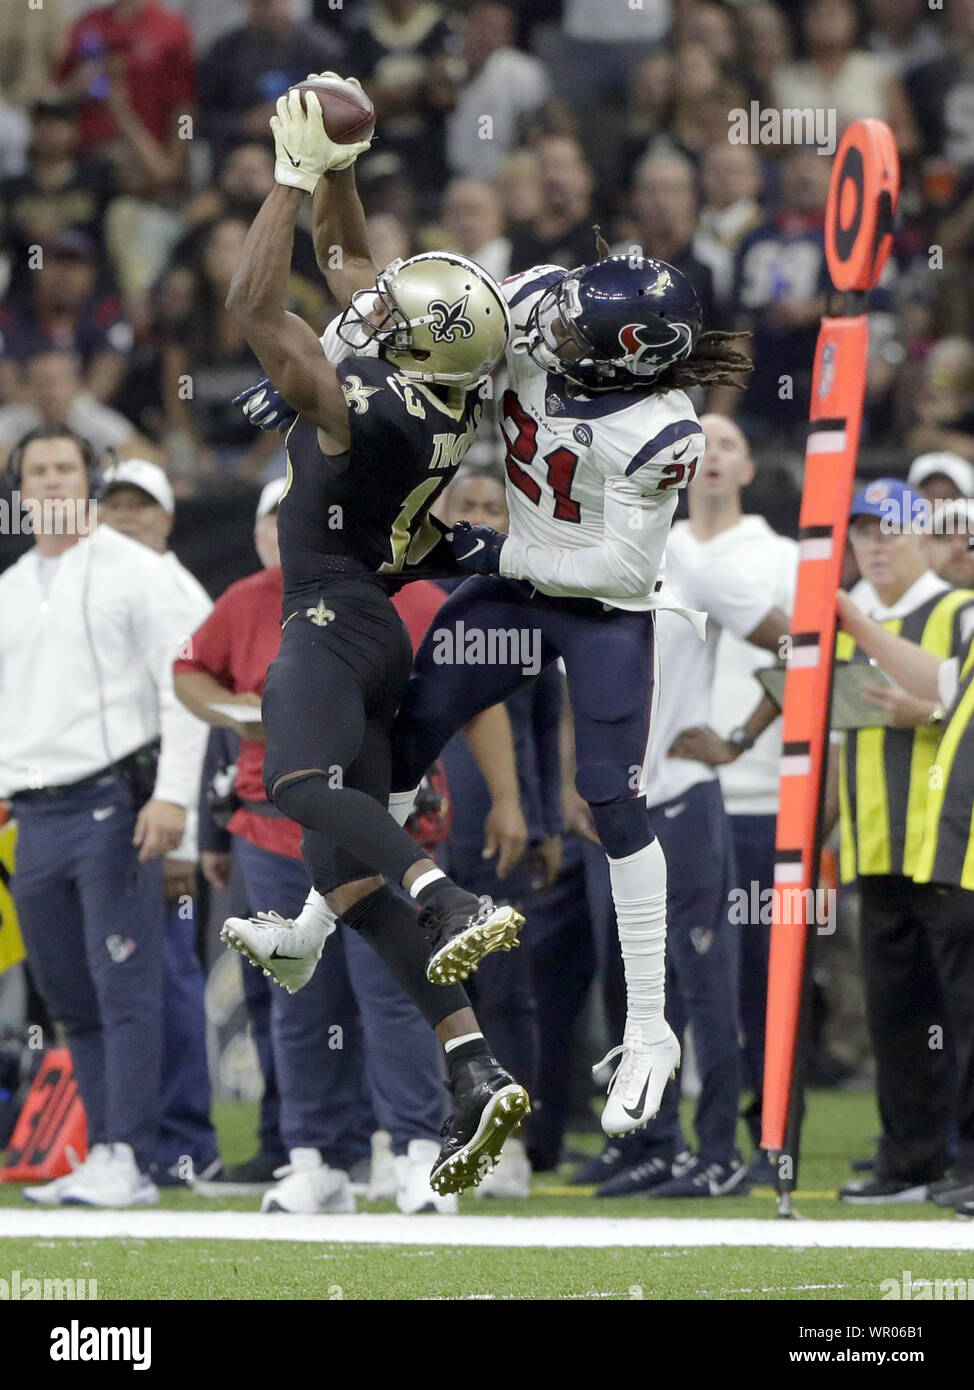 New Orleans, United States. 09th Sep, 2019. New Orleans Saints wide receiver Michael Thomas (13) catches a Drew Brees pass in front of Houston Texans cornerback Bradley Roby (21) for a first down late in the second quarter at the Louisiana Supedome in New Orleans on Monday, September 9, 2019. Photo by AJ Sisco/UPI Credit: UPI/Alamy Live News Stock Photo